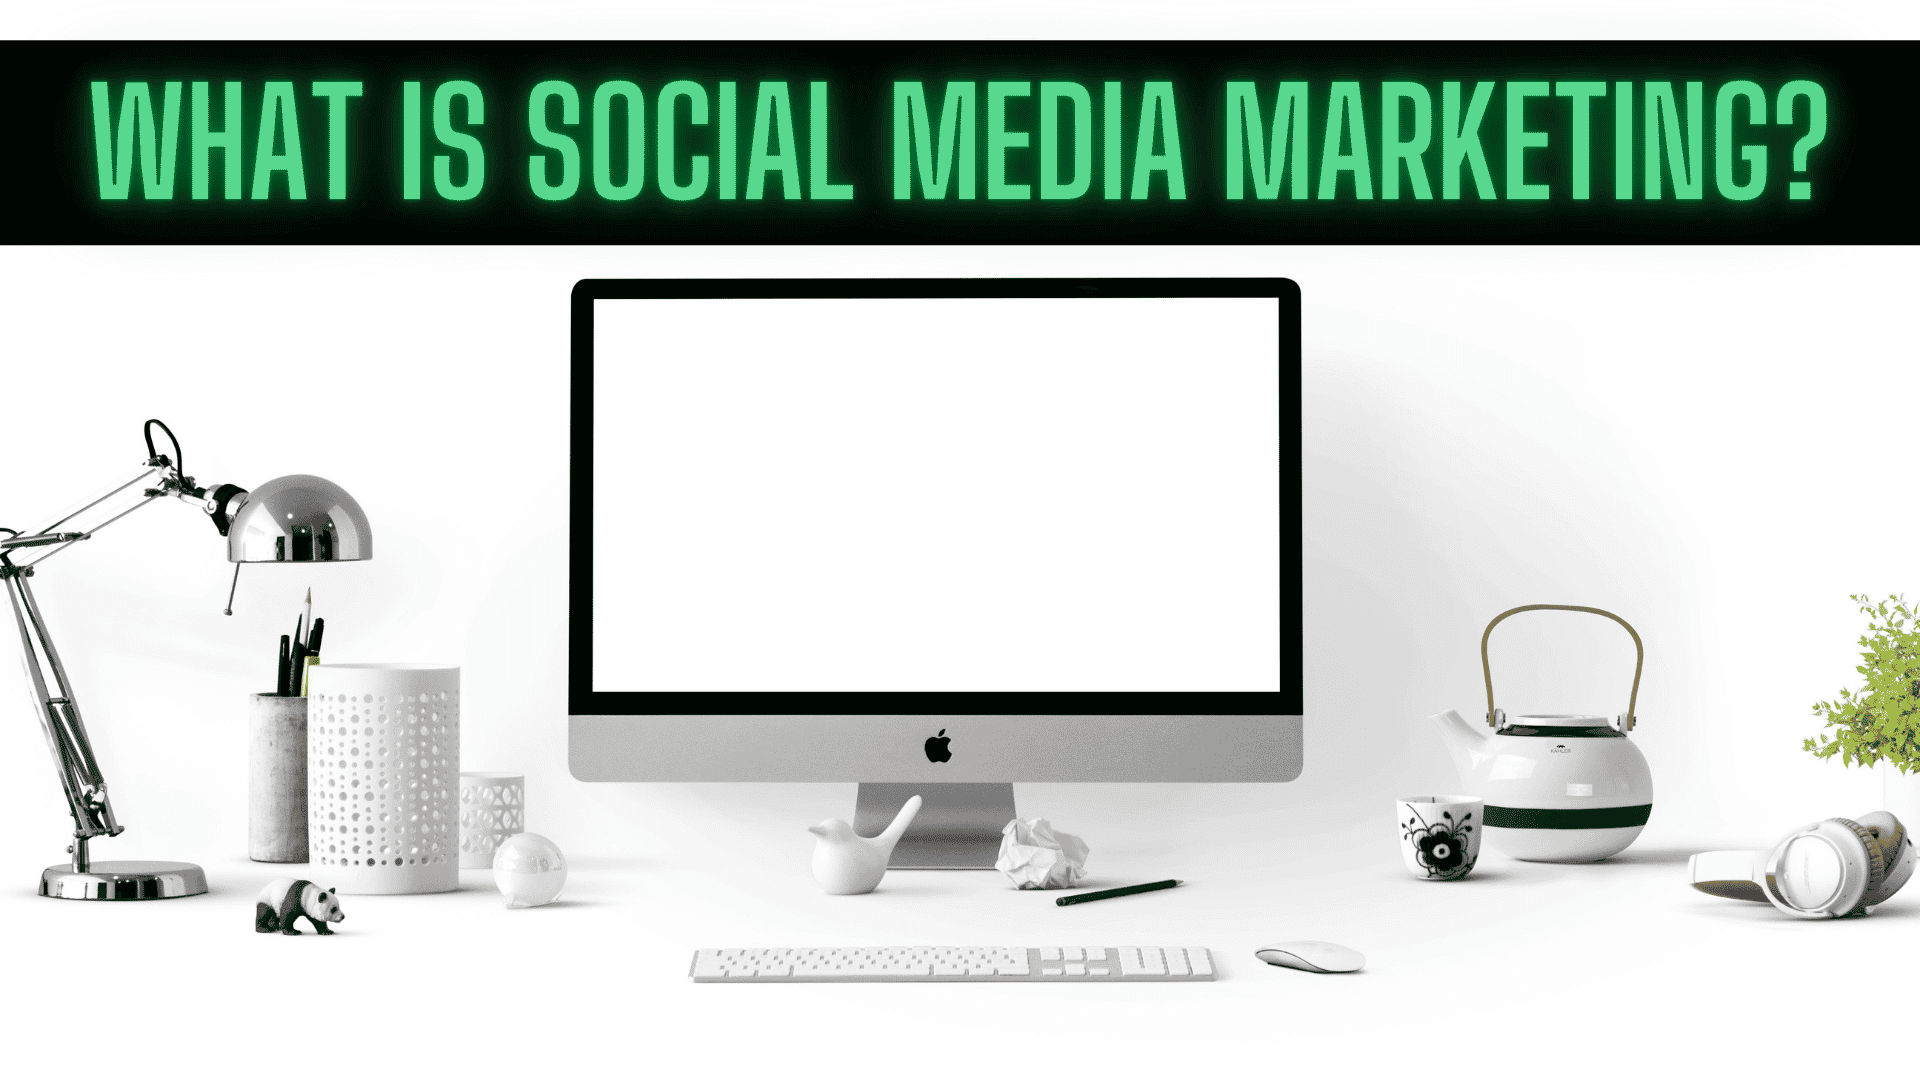 How To Start A Social Media Marketing Business